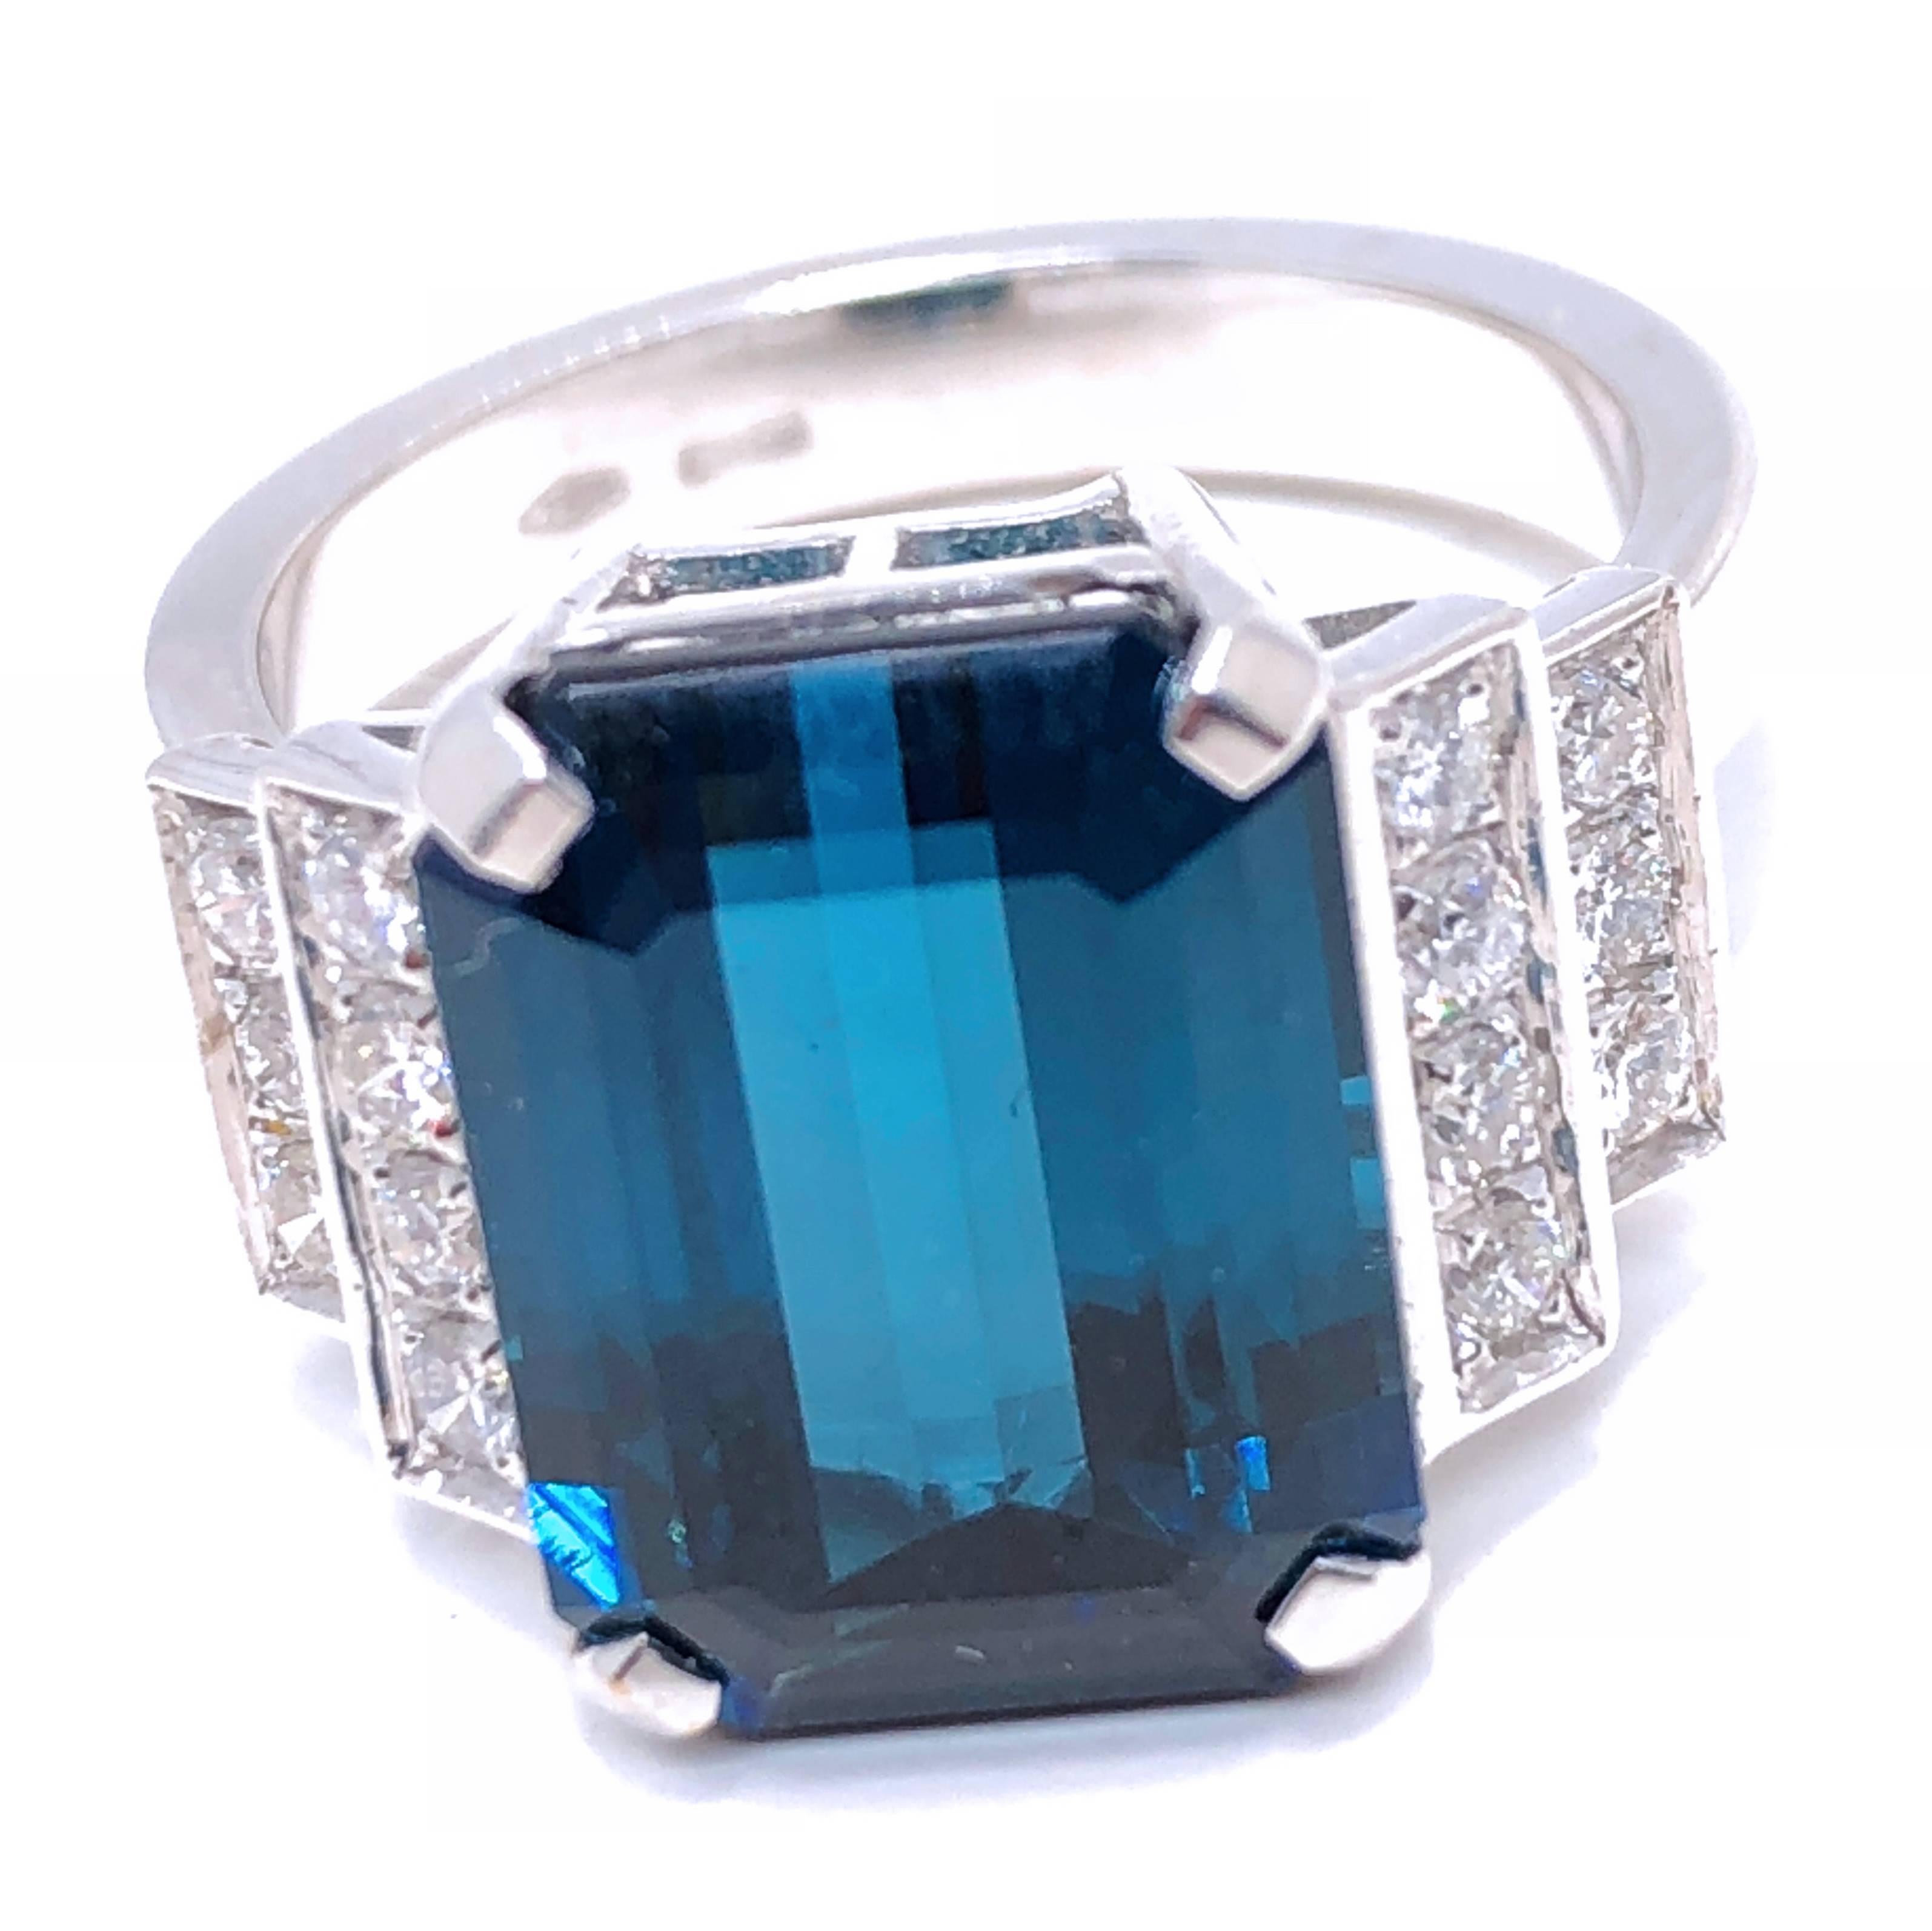 One-of-a-kind Octagonal Cut Indicolithe, a Rare Indigo-Blue Tourmaline (0.5122x0.385x0.228inches) in a chic and timeless White Diamond (0.34kt, D-E VVs1) 18 kt White Gold Setting. The color of this beautiful stone is absolutely natural, not